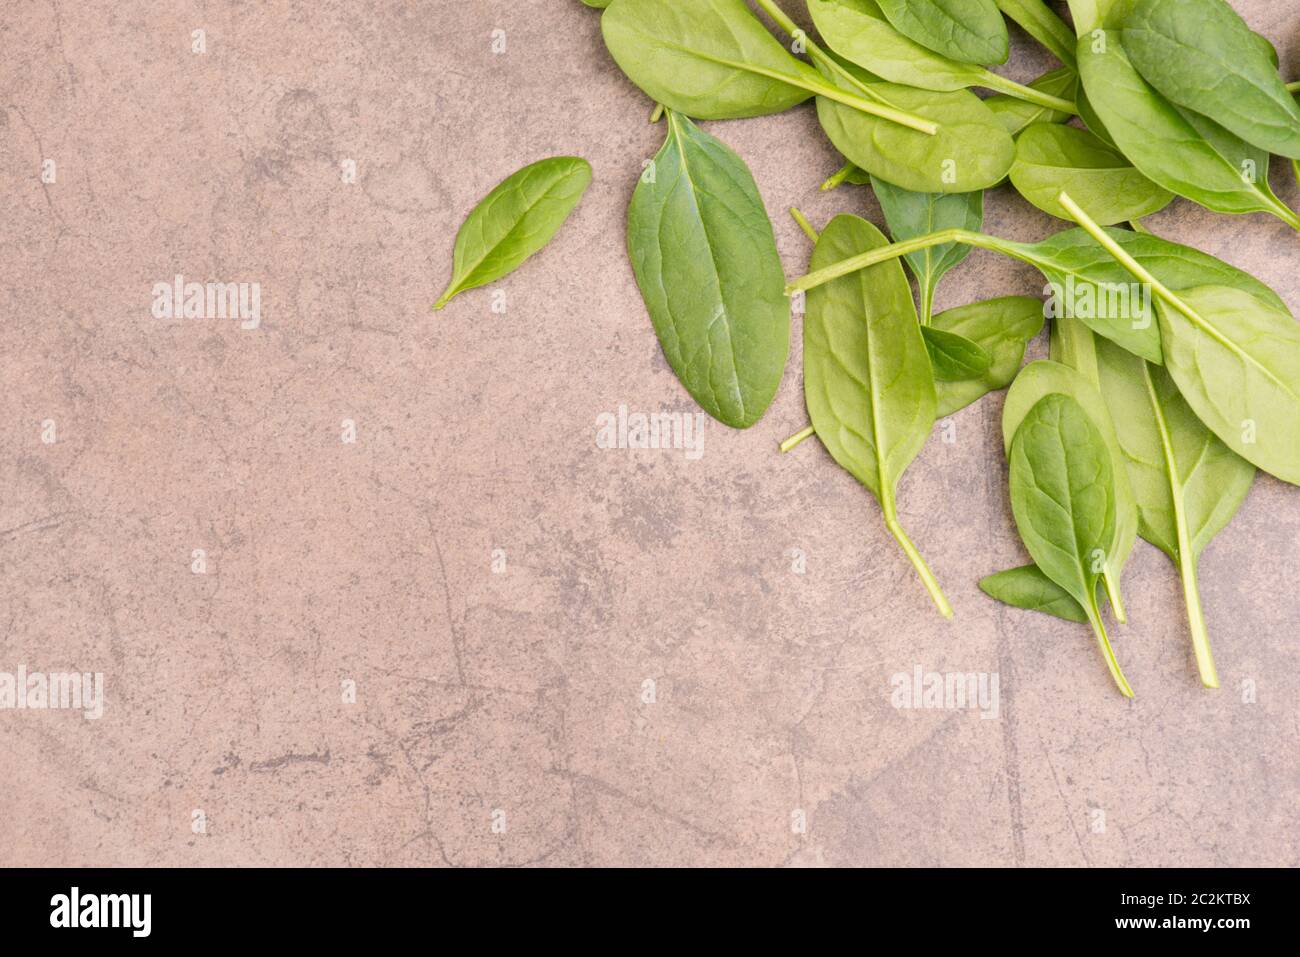 Fresh green spinach leaves on a brown textured background Stock Photo